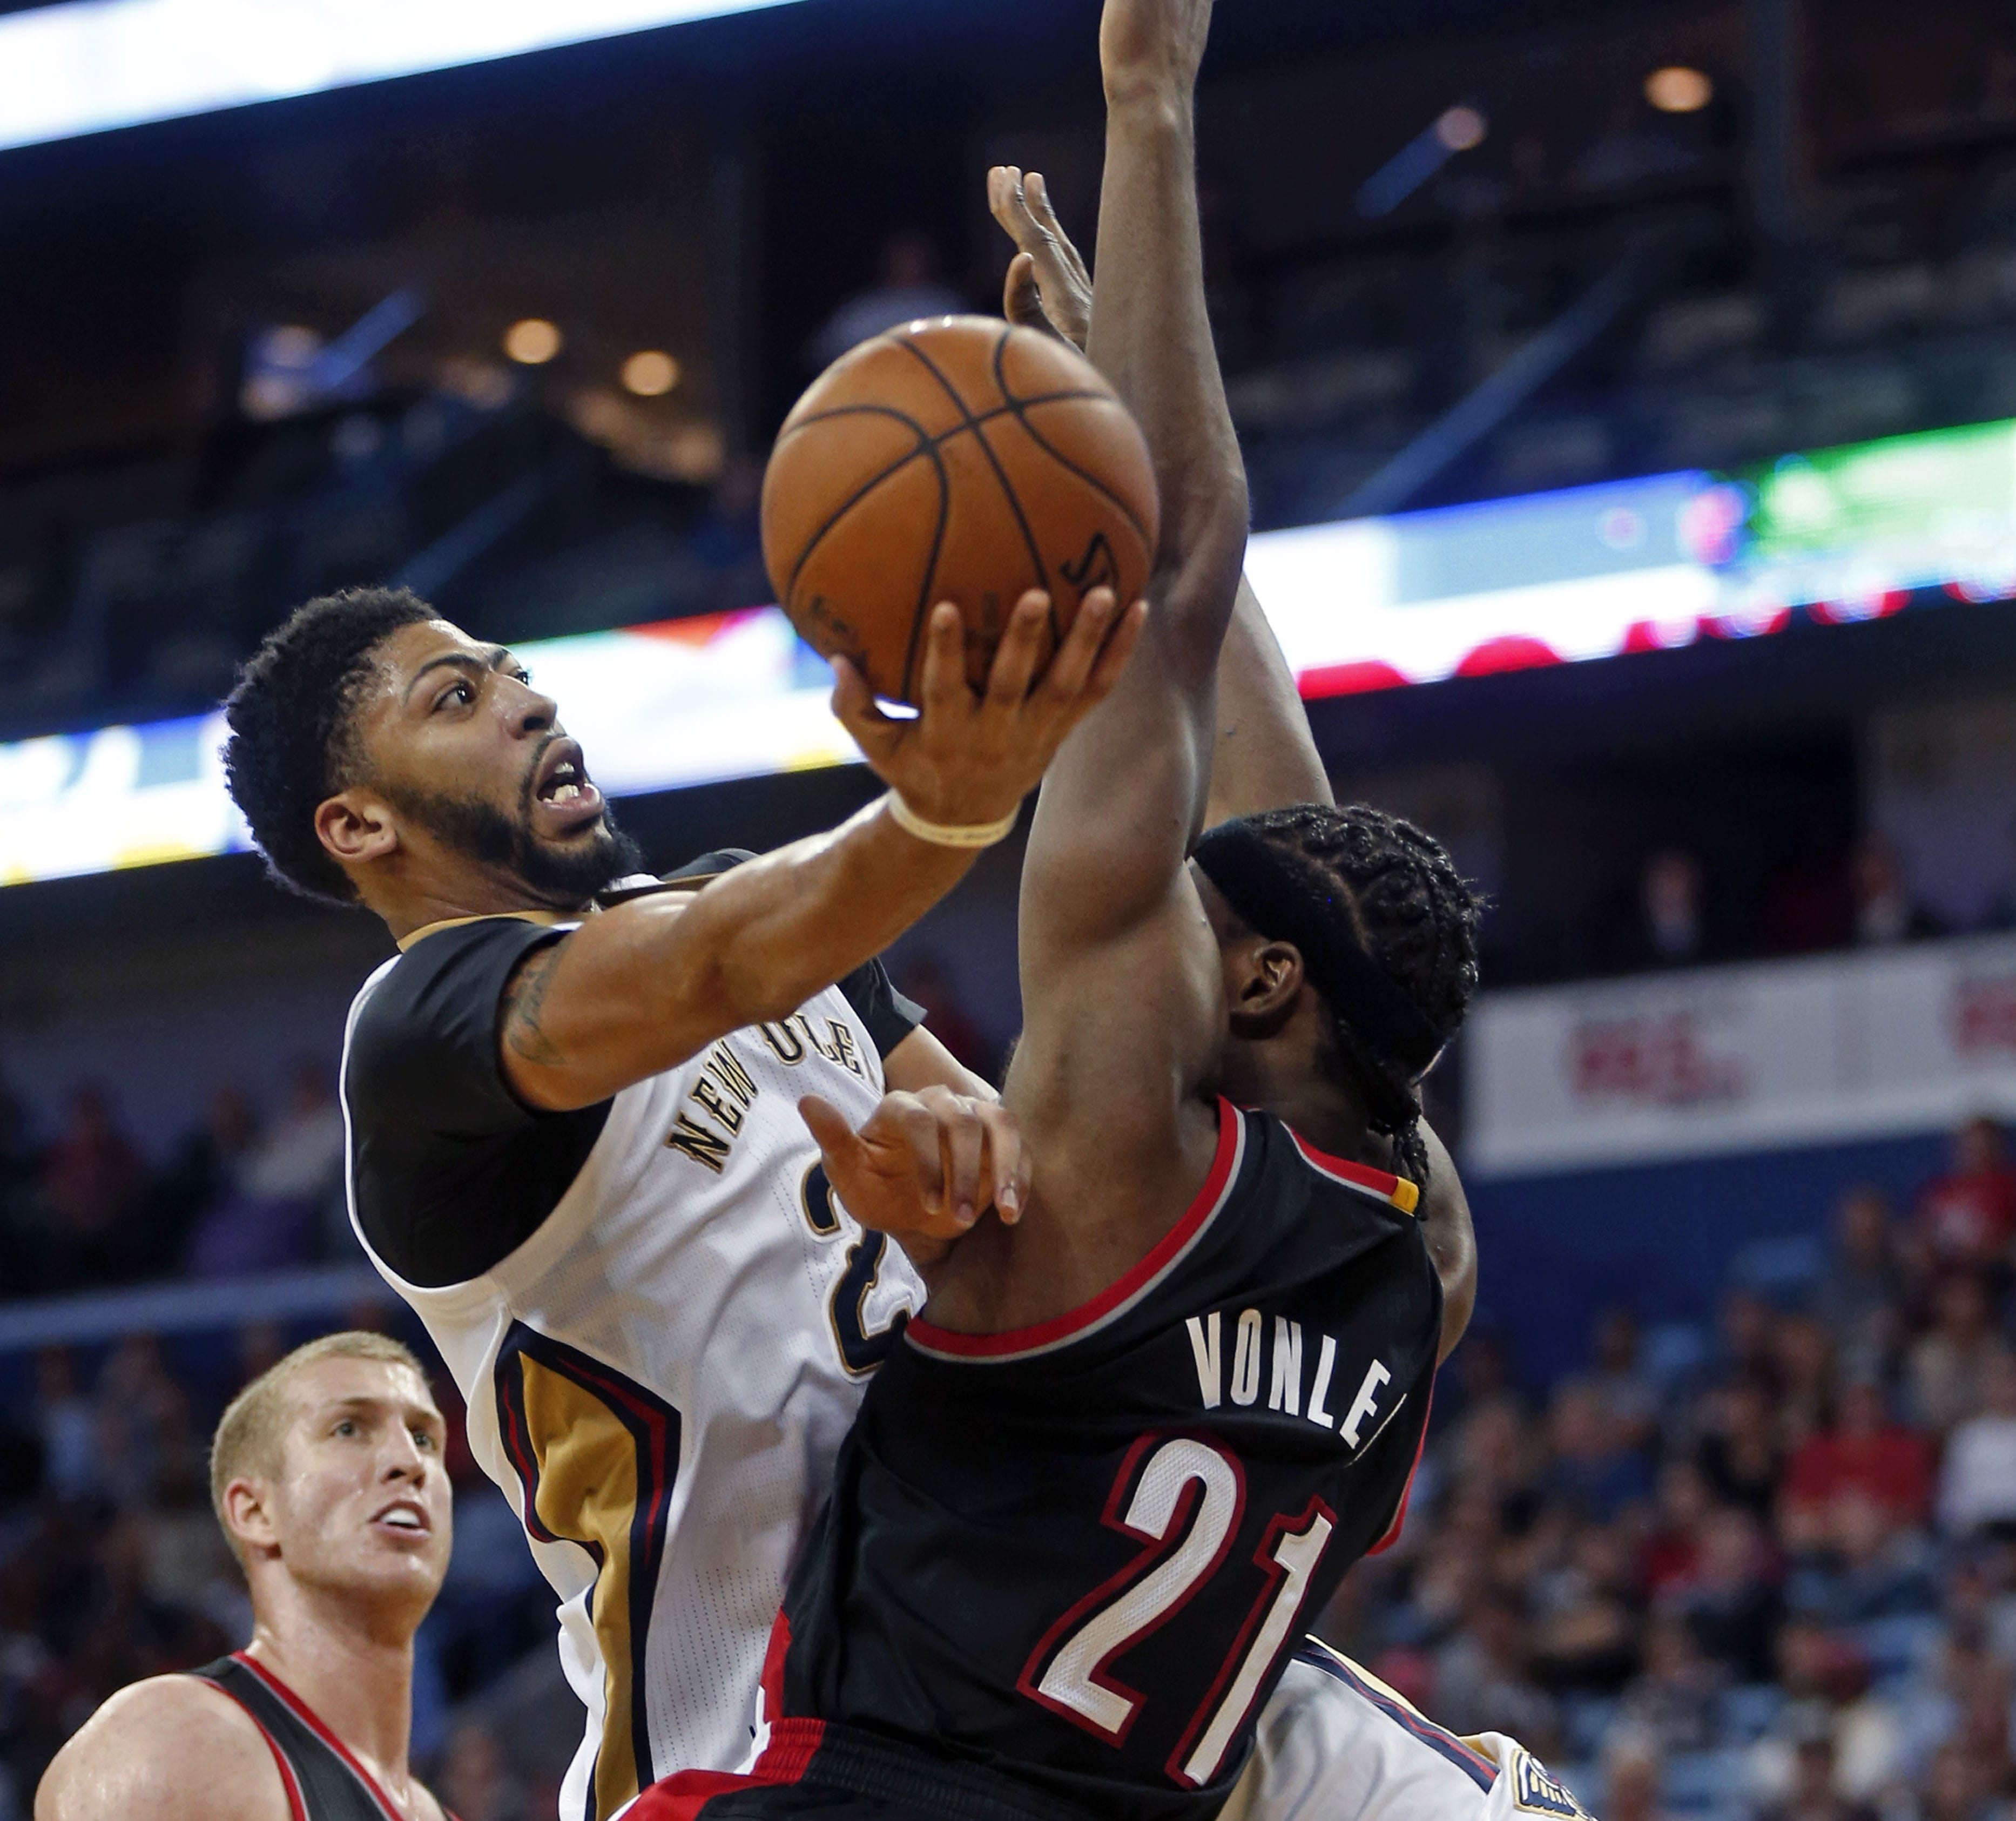 New Orleans Pelicans forward Anthony Davis (23) drives to the basket against Portland Trail Blazers forward Noah Vonleh (21) in the second half of an NBA basketball game in New Orleans, Friday, Nov. 18, 2016. The Pelicans won 113-101.